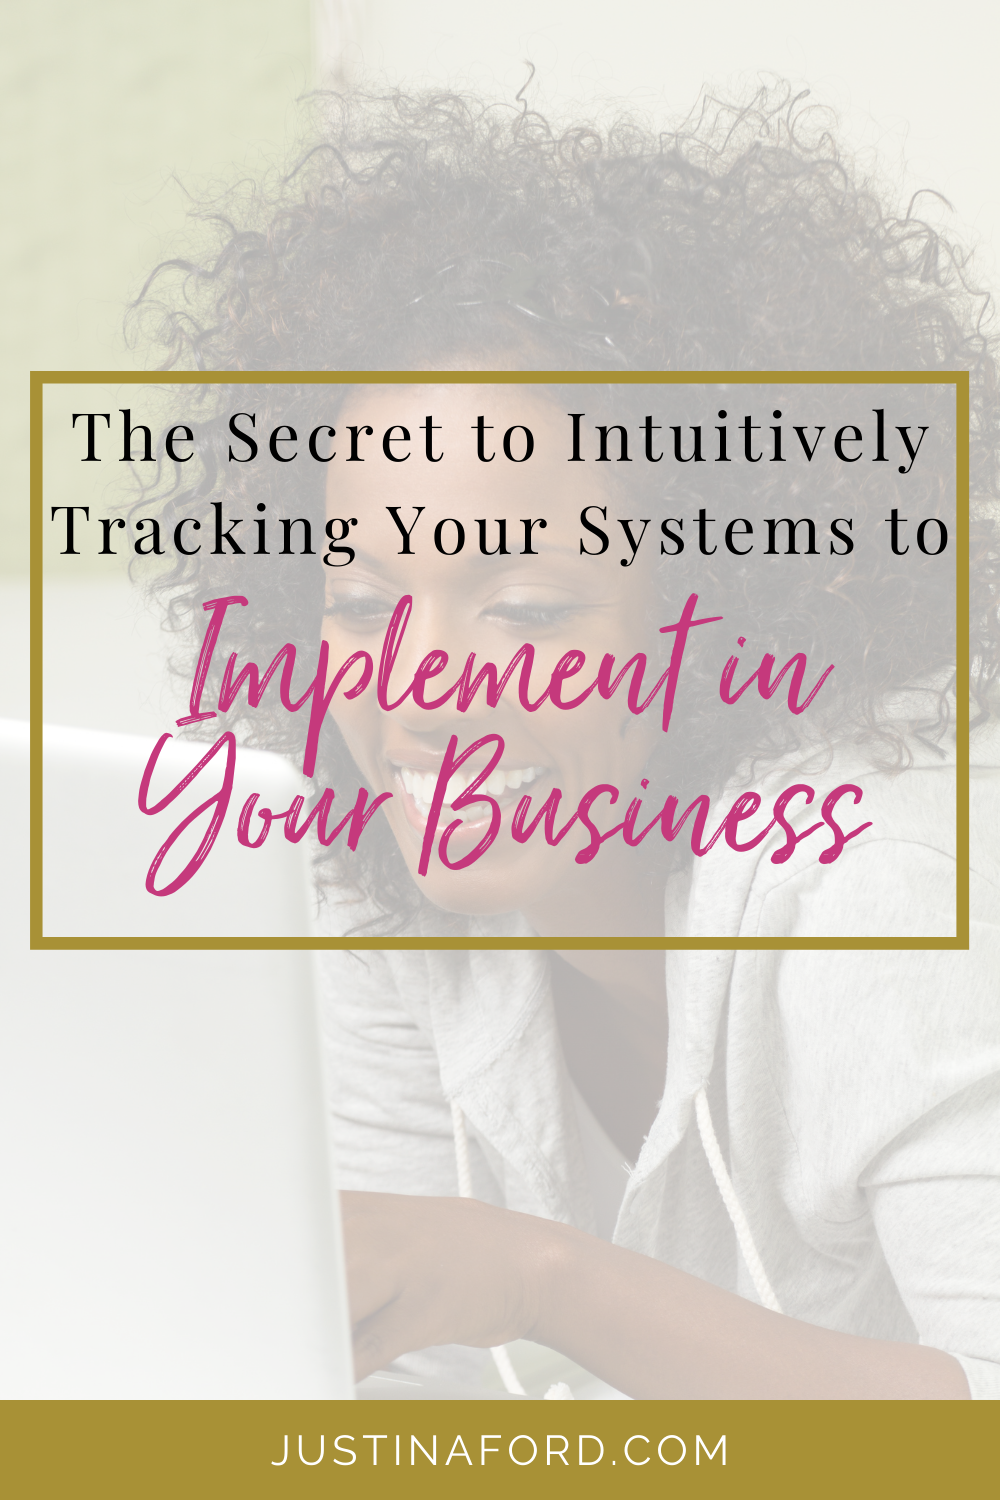 The secret to intuitively tracking your systems to implement in your business.